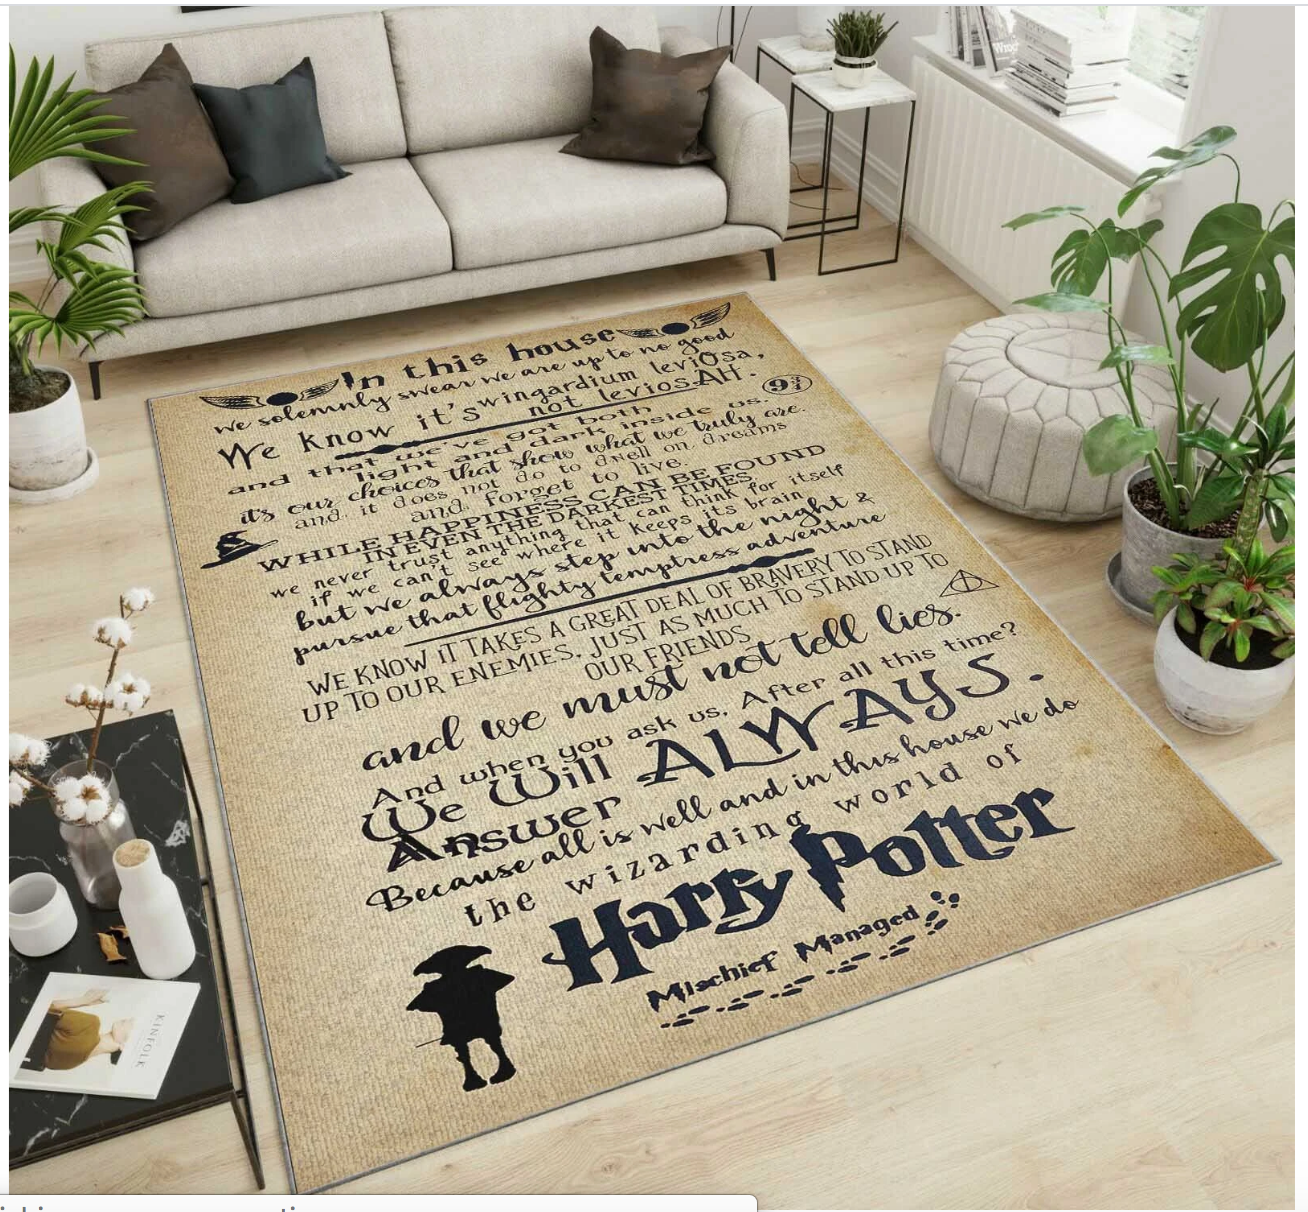 In This House Harry Potter Carpet Area Rug Floor Home Room Decor Room Décor